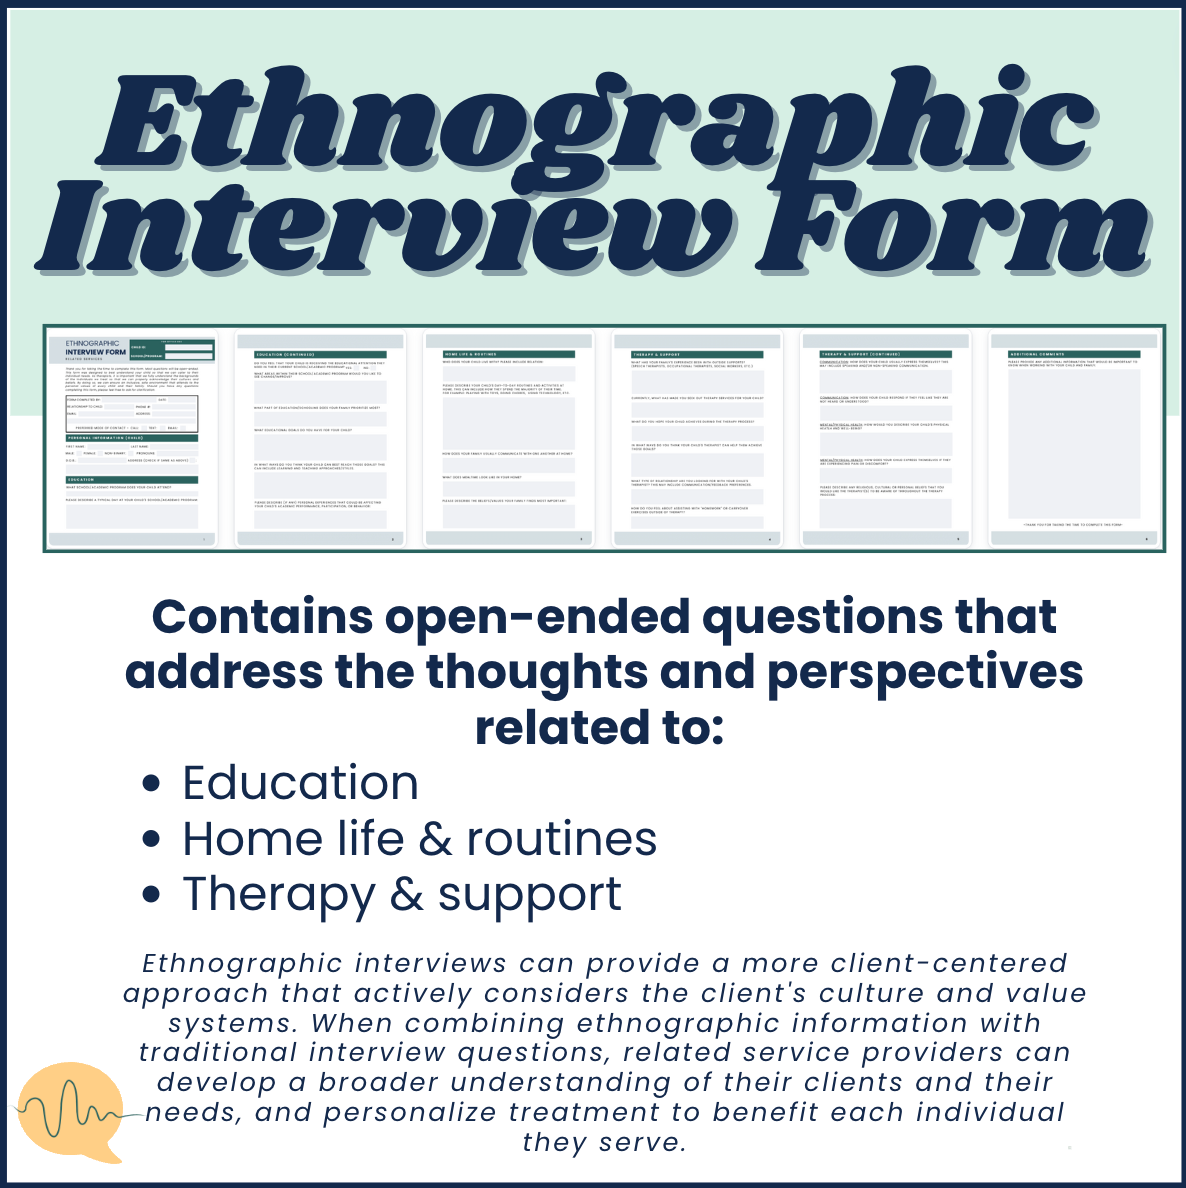 Case History and Ethnographic Interview BUNDLE for Speech Therapy: FILLABLE PDFs